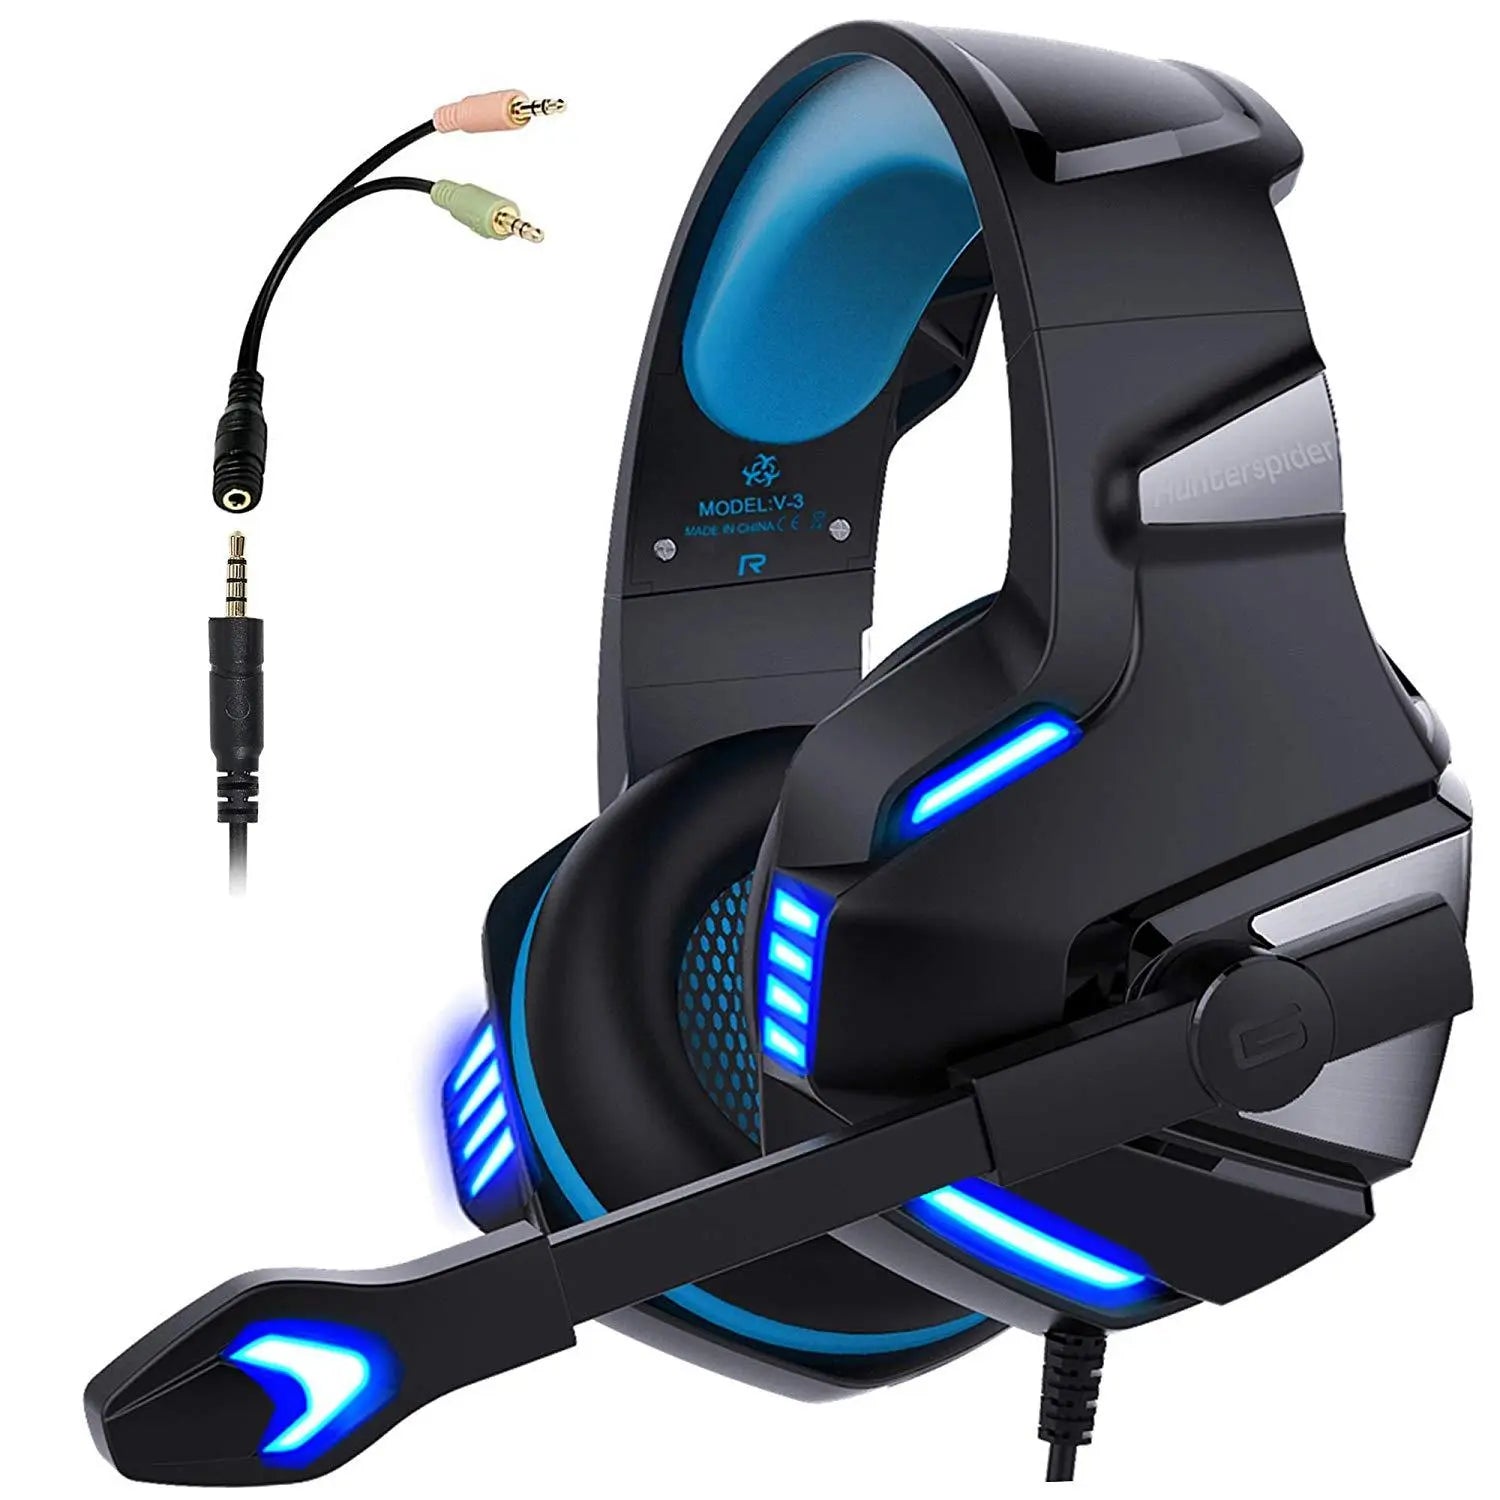 Wintory V3 Gaming Headset for PS4 Xbox One Wintory